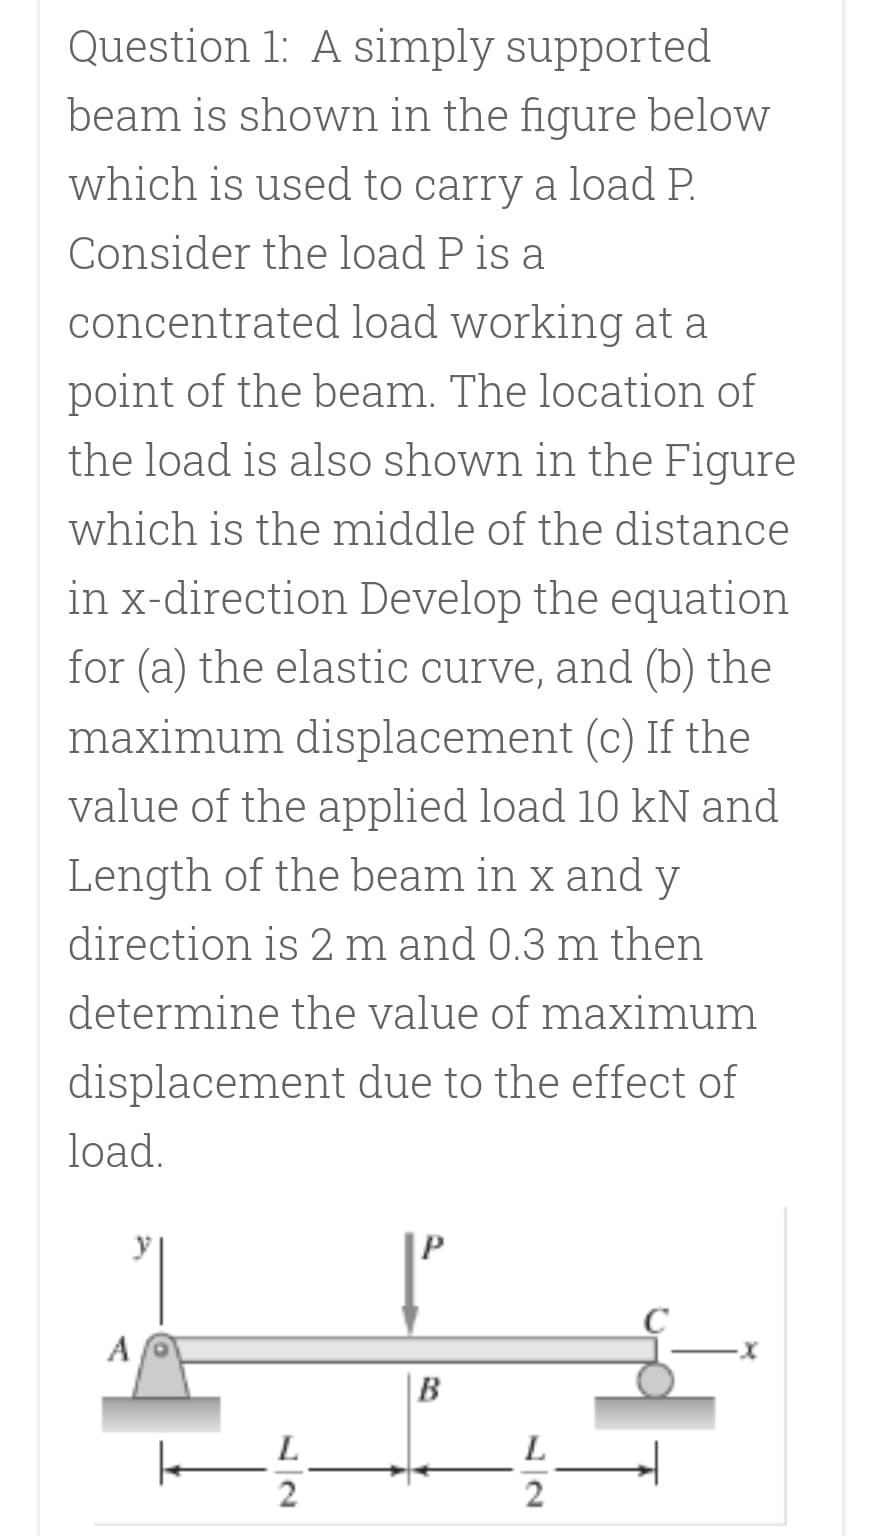 Question 1: A simply supported
beam is shown in the figure below
which is used to carry a load P.
Consider the load P is a
concentrated load working at a
point of the beam. The location of
the load is also shown in the Figure
which is the middle of the distance
in x-direction Develop the equation
for (a) the elastic curve, and (b) the
maximum displacement (c) If the
value of the applied load 10 kN and
Length of the beam in x and y
direction is 2 m and 0.3 m then
determine the value of maximum
displacement due to the effect of
load.
A
B
L
L.
2
2
